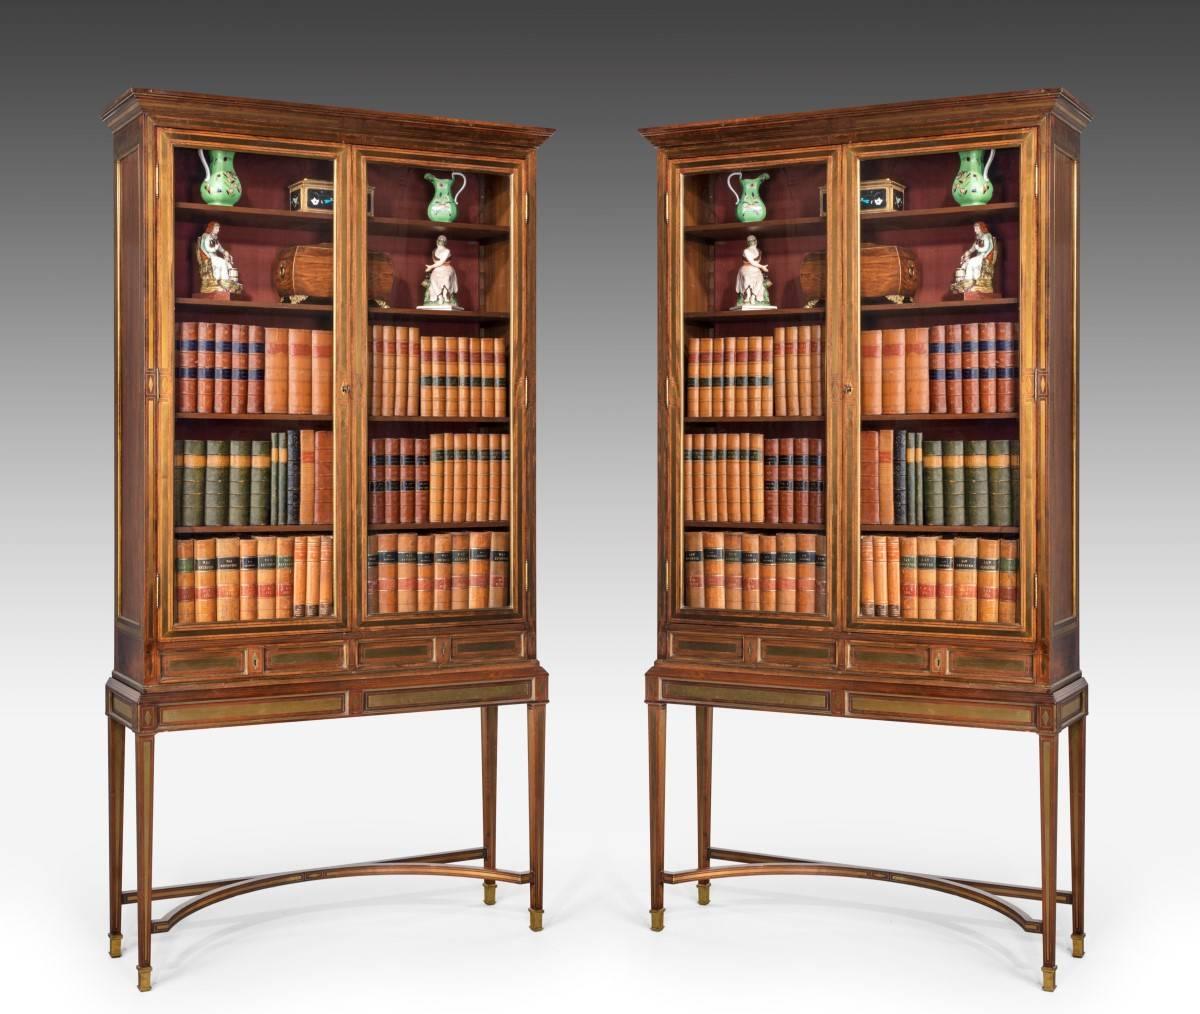 Pair of 20th century inlaid Russian display cabinets. Standing on four tapering legs united with a stretcher.